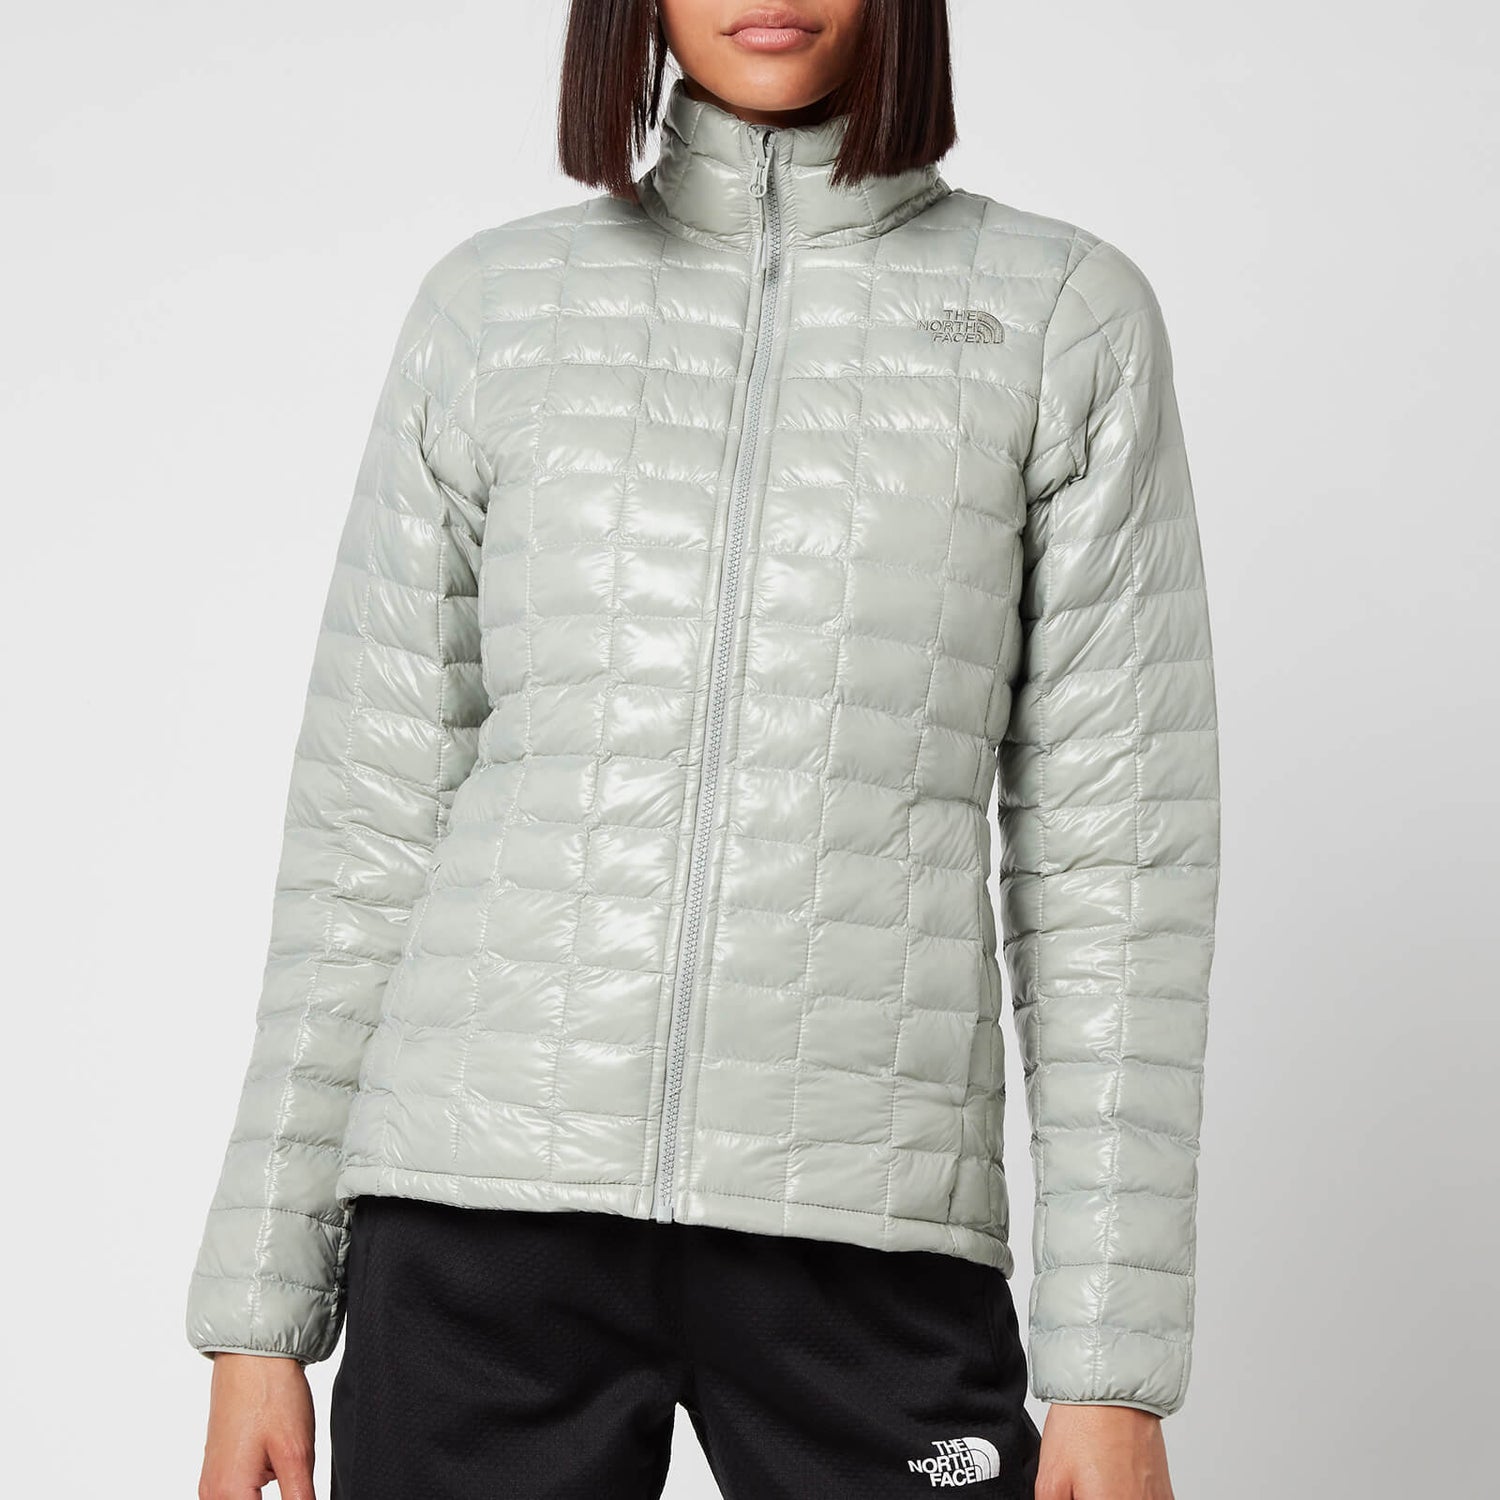 The North Face Women's Thermoball Eco Padded Jacket - Wroght Iron/Surreal Sky Print